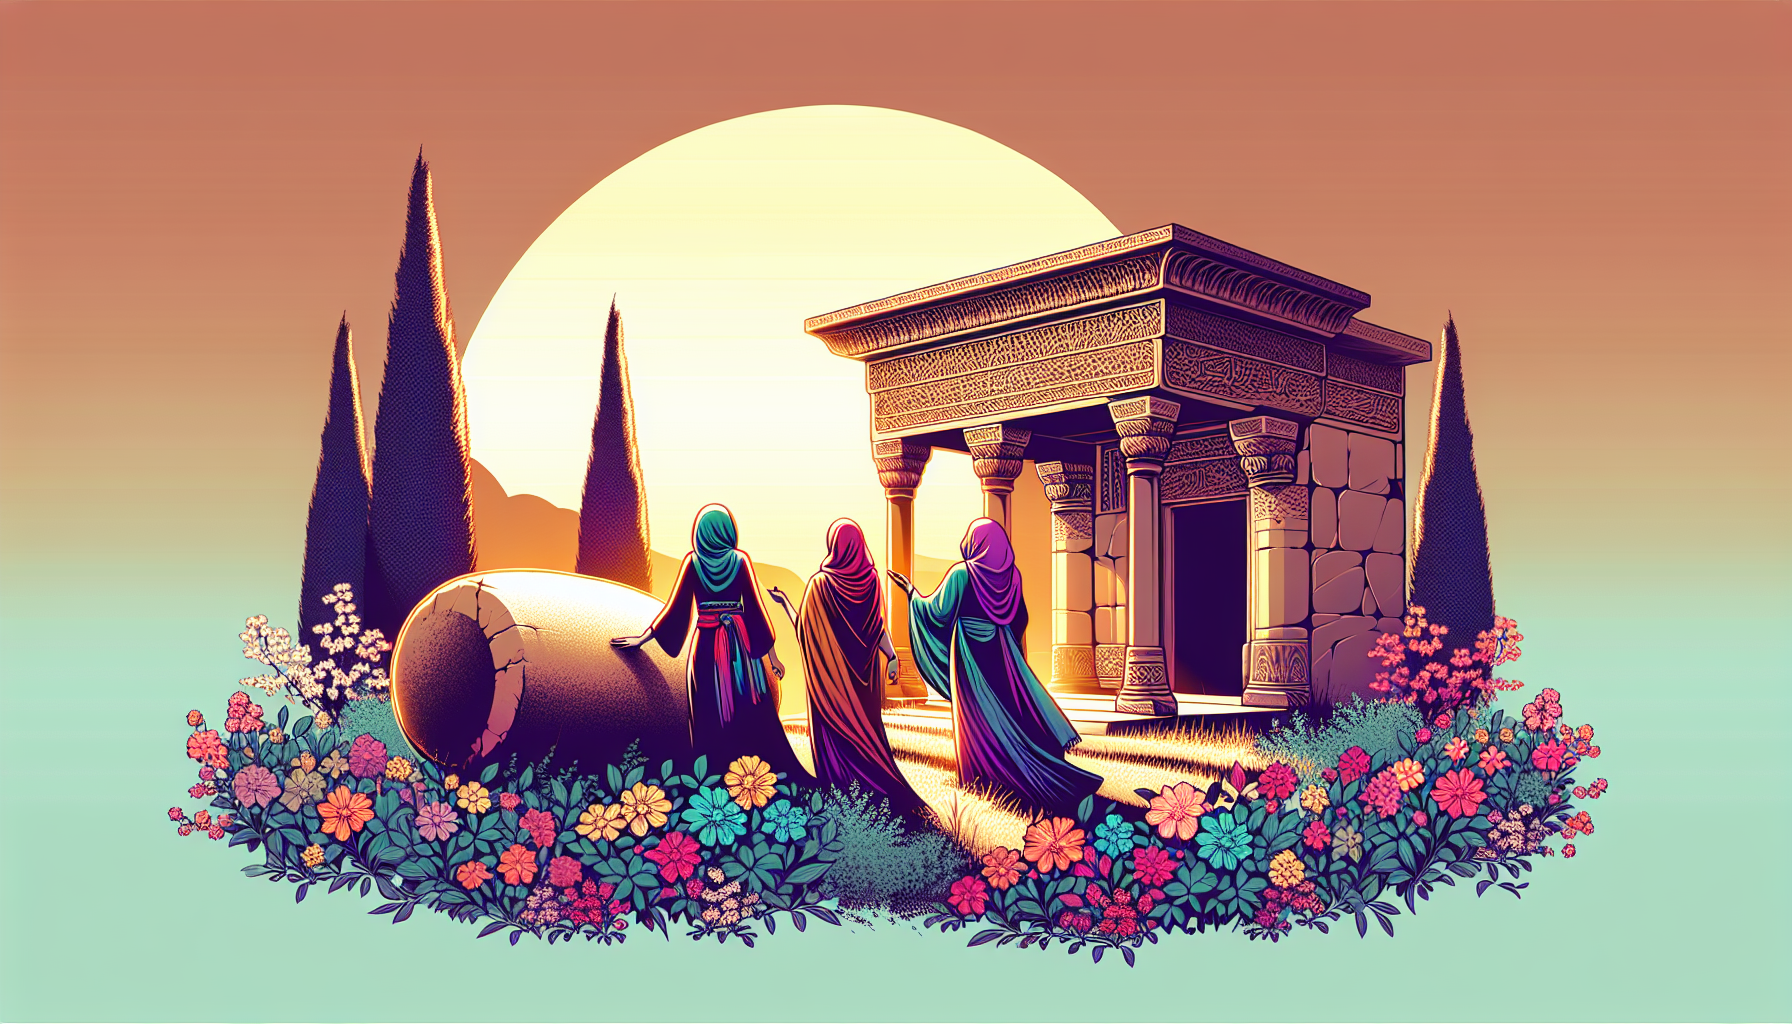 Peaceful sunrise over an ancient empty tomb with a large stone rolled aside, surrounded by blooming flowers and soft light, with three joyful women in period-appropriate Middle Eastern attire witnessi